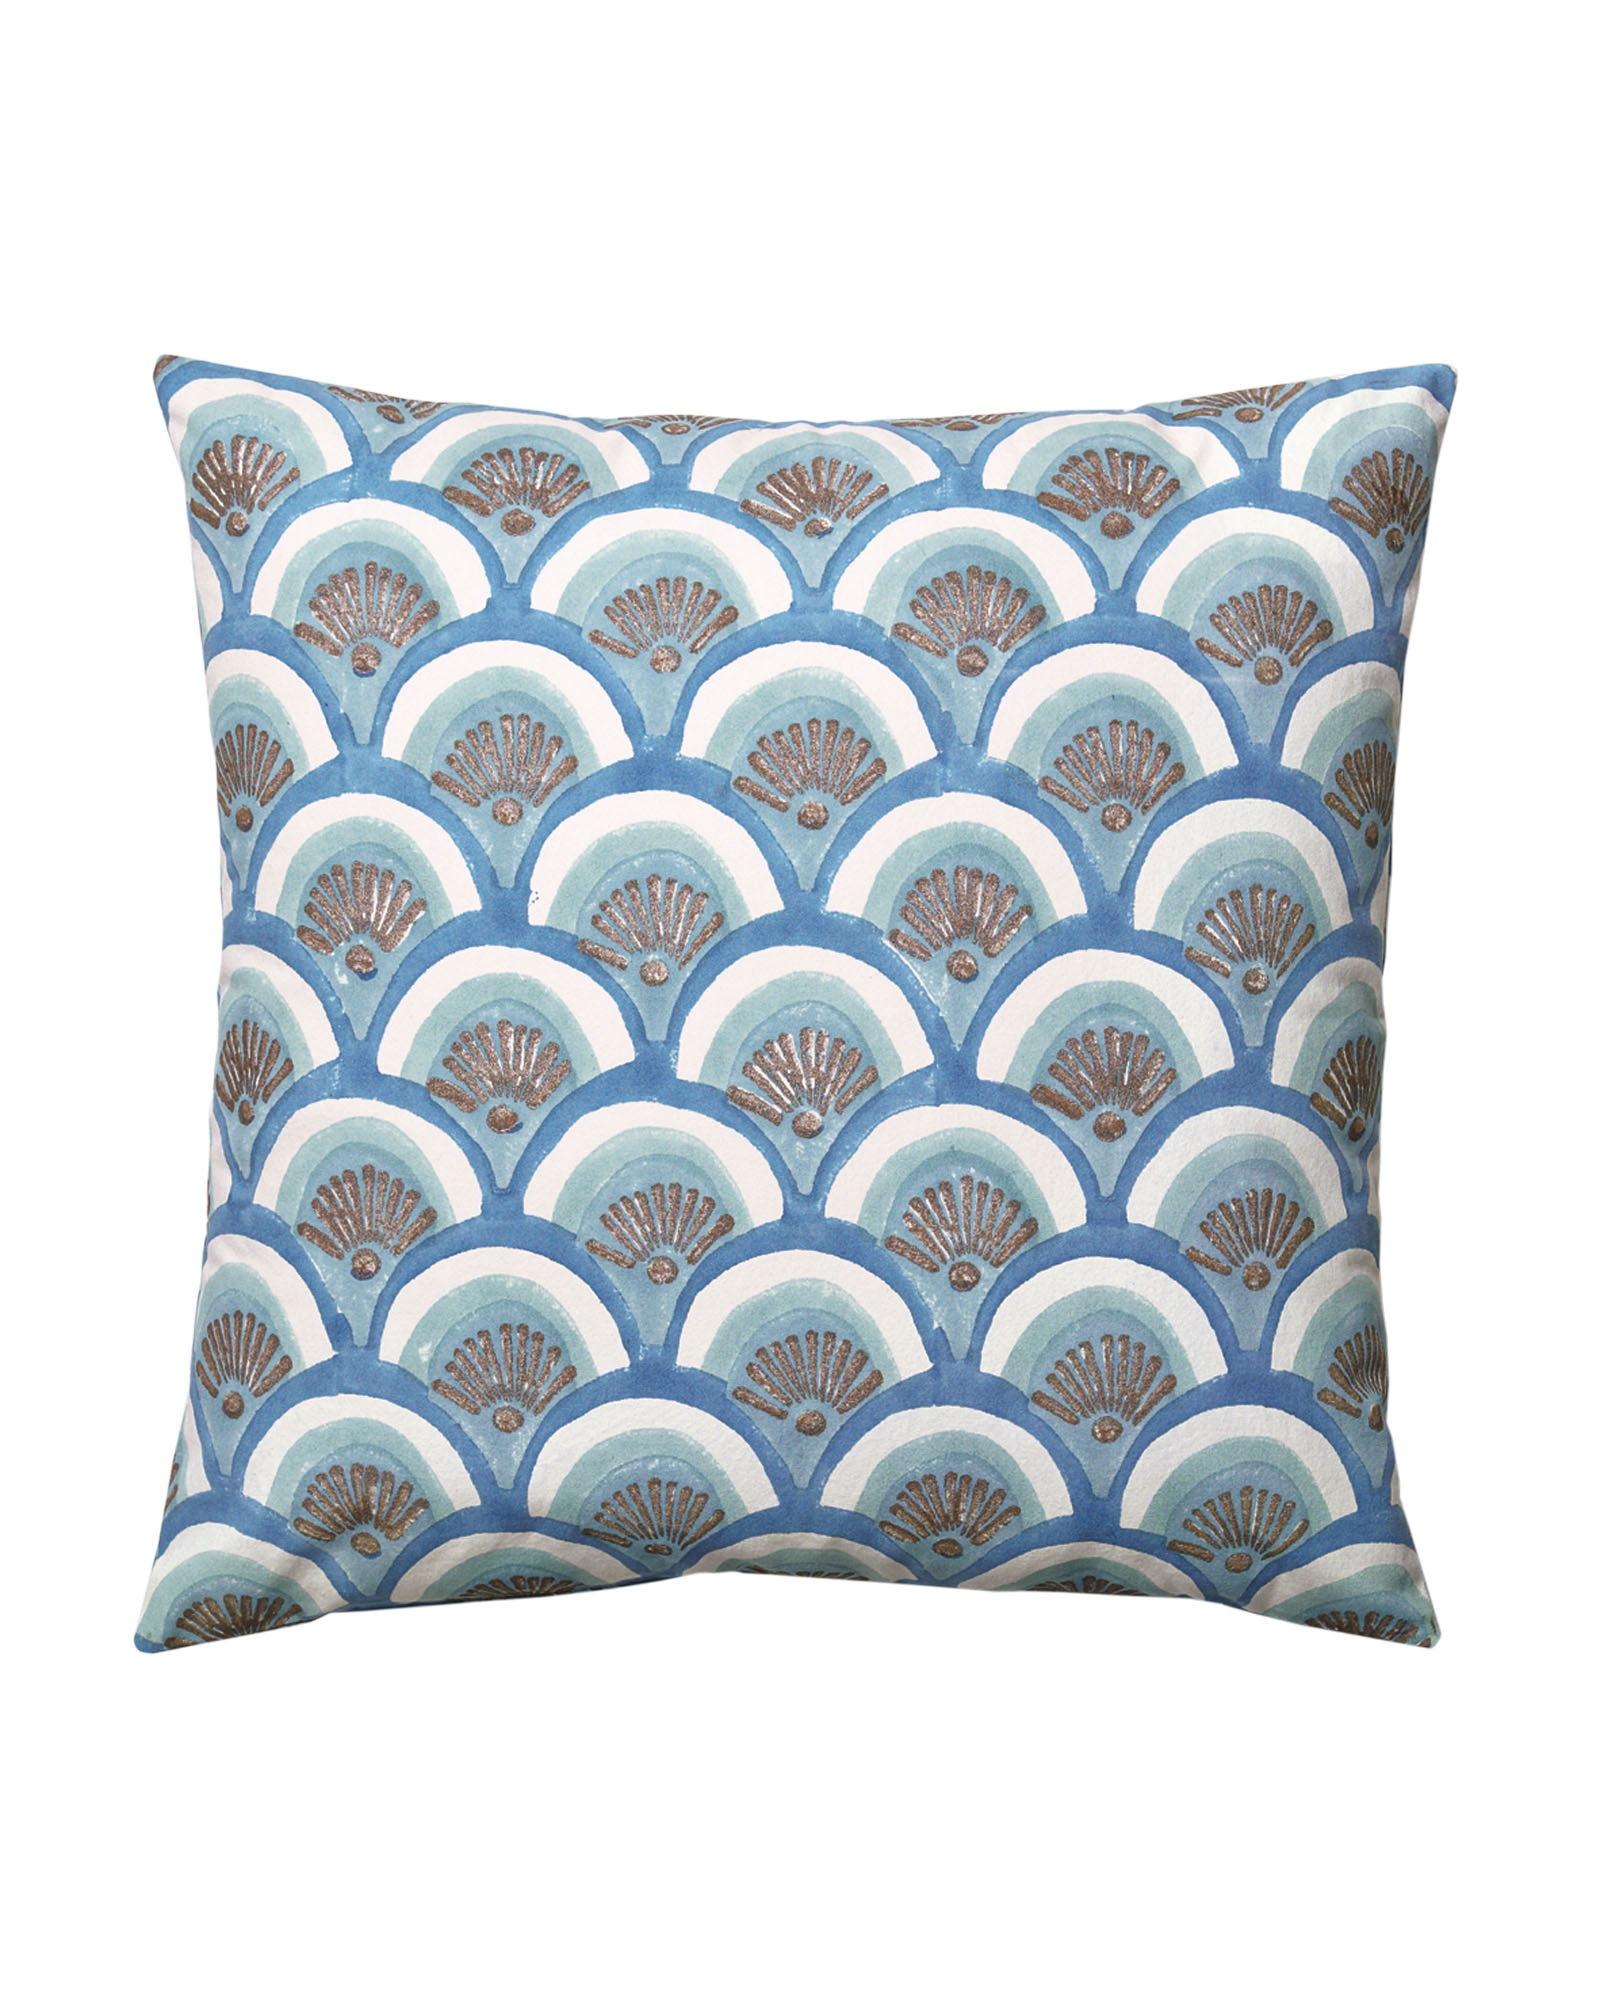 Kyoto Pillow Covers - Marine-20"SQ-Insert sold separately - Image 0